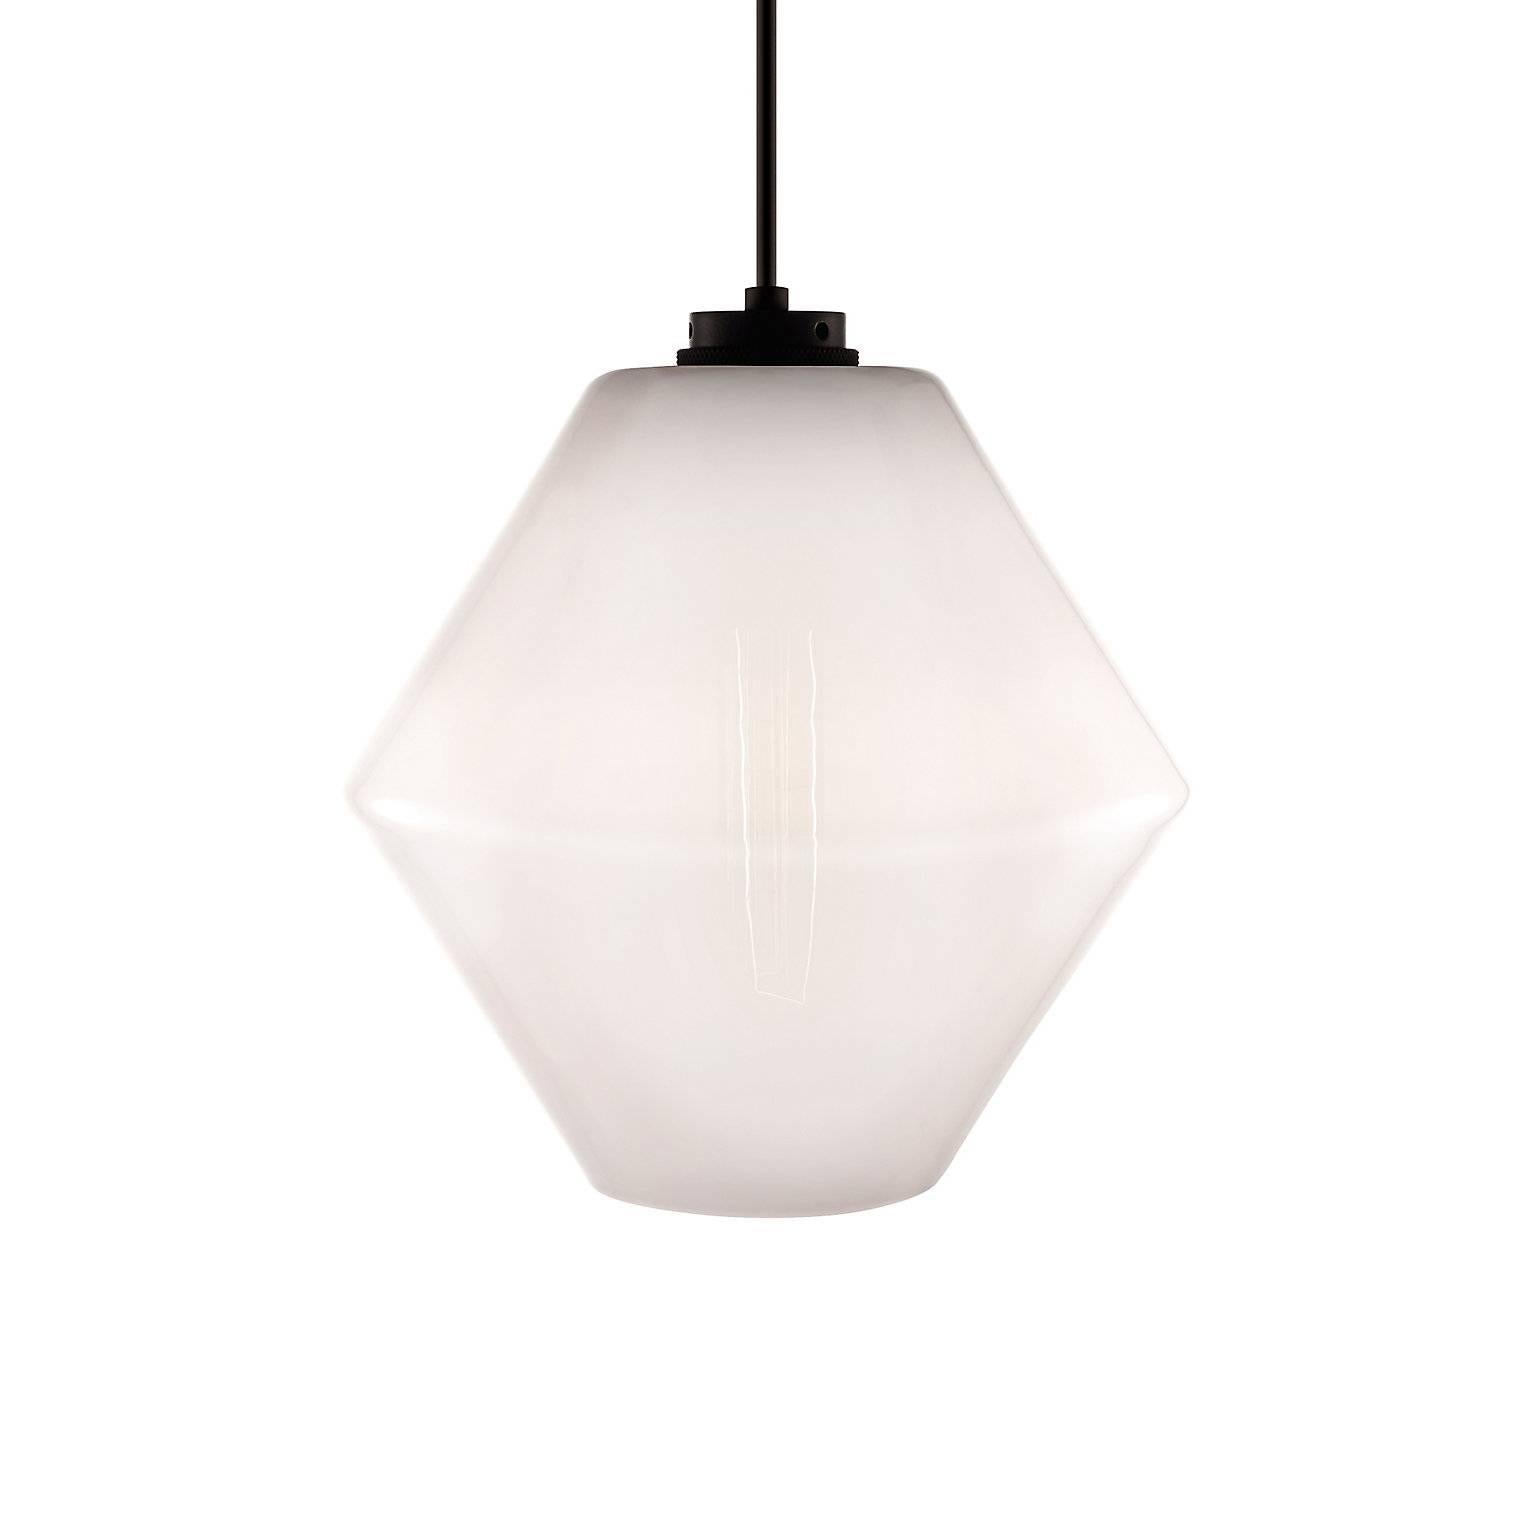 American Trove Crystal Handblown Modern Glass Pendant Light, Made in the USA For Sale